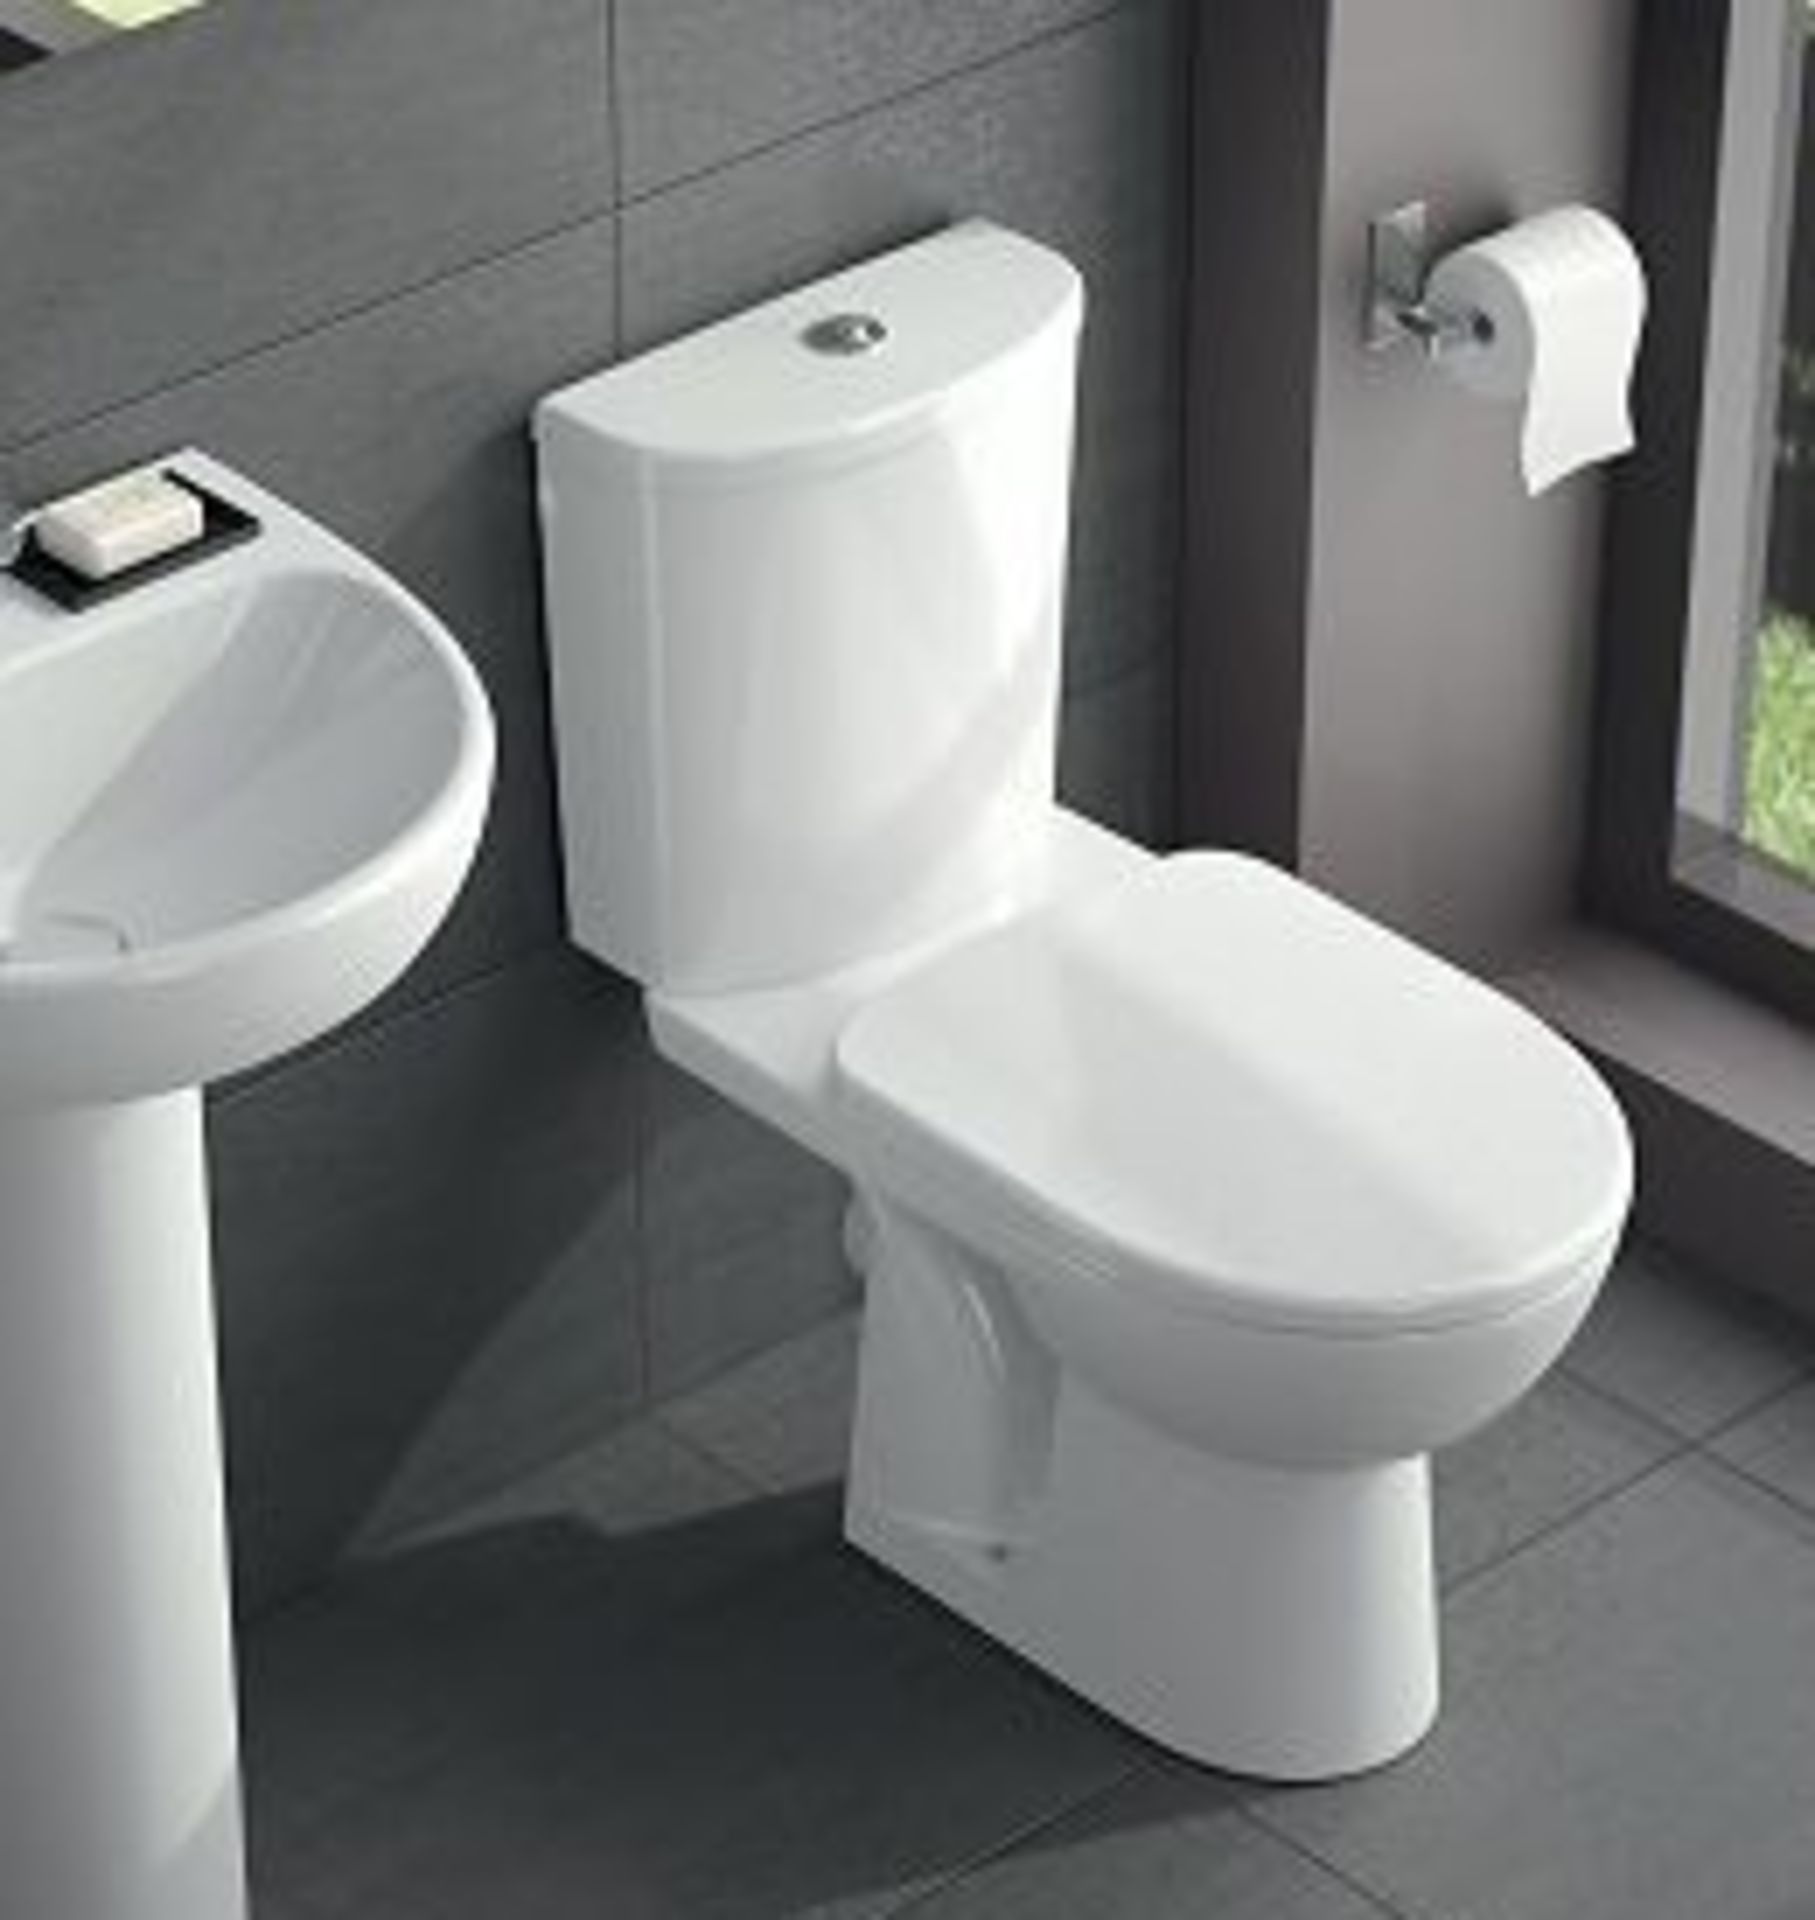 Twyford Fiji Round Close Coupled Toilet Pan. Constructed from Ceramic material for excellent du...